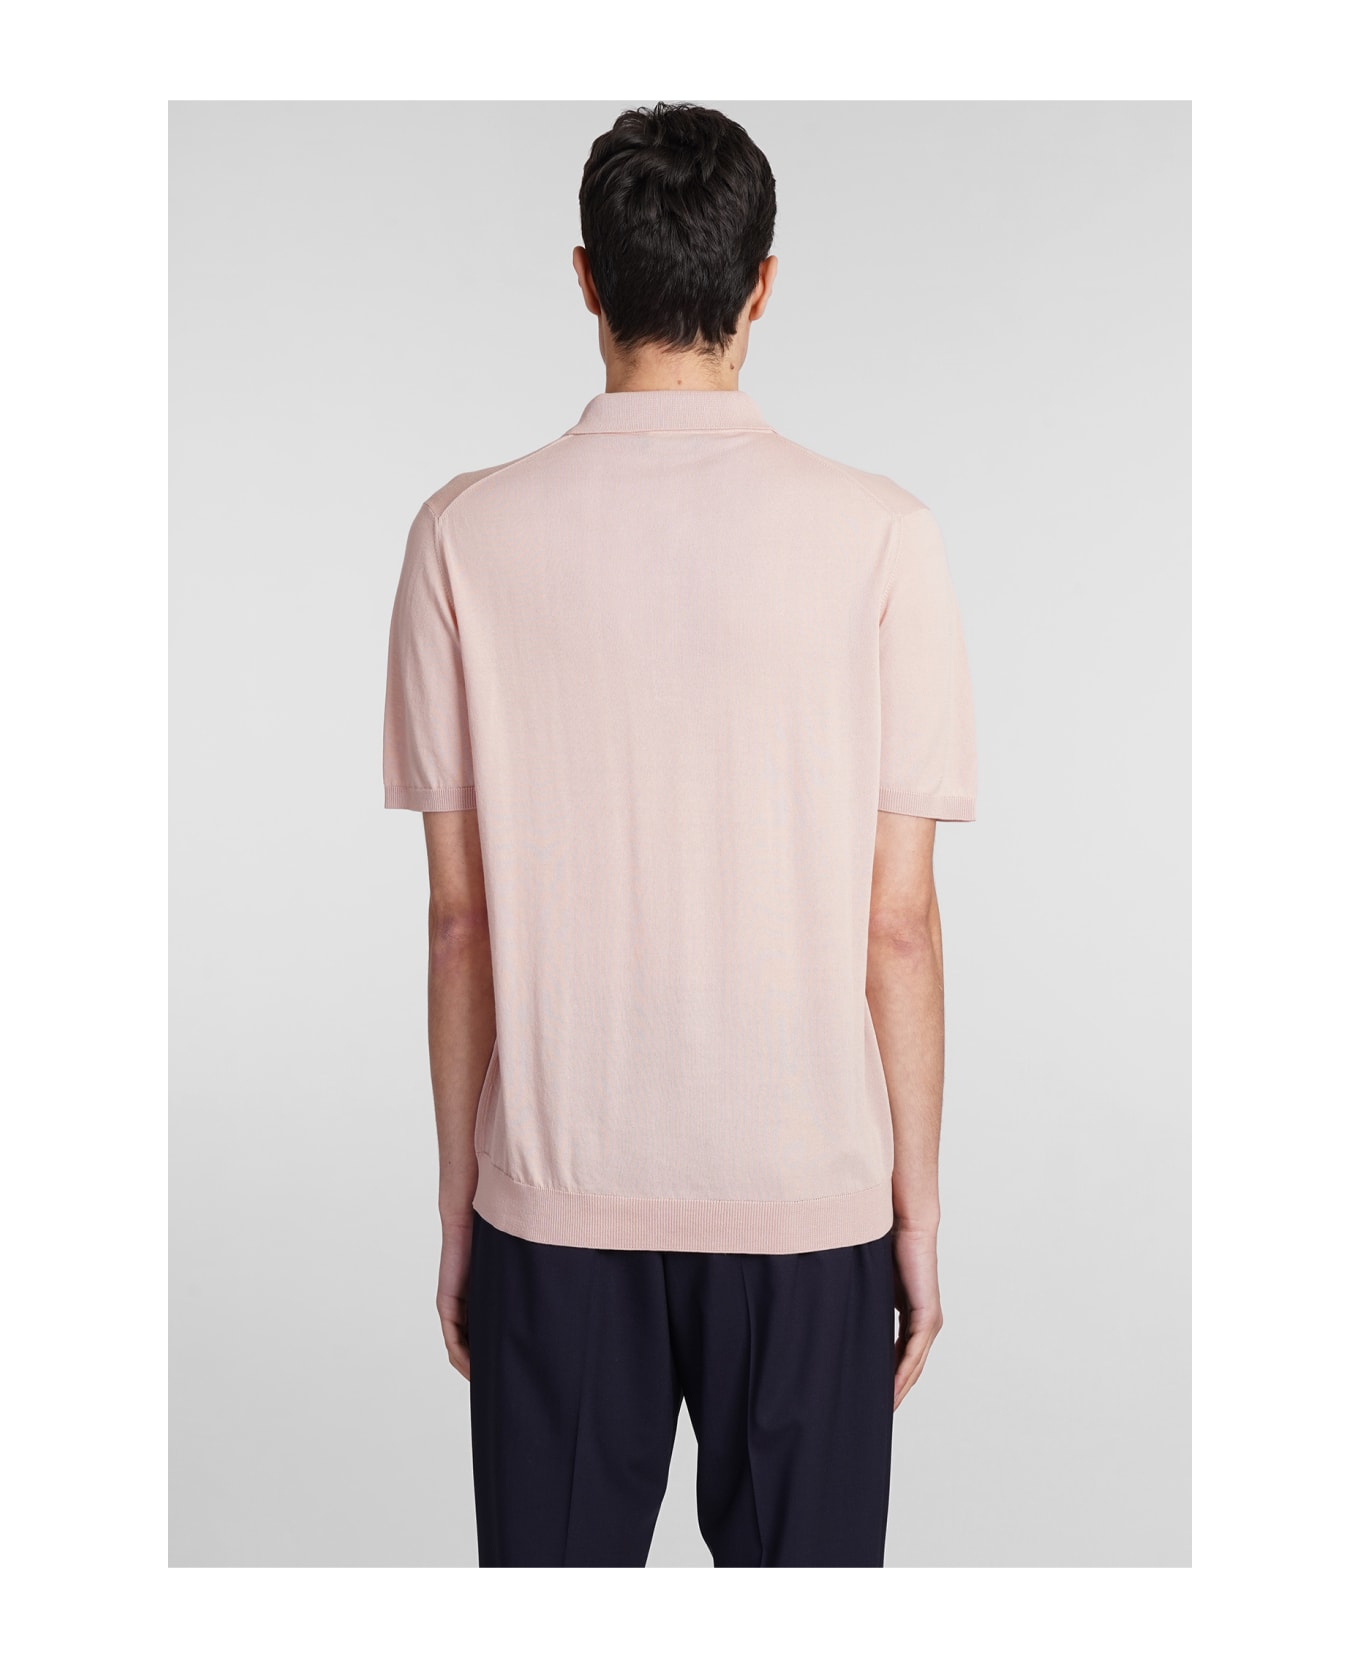 Roberto Collina Polo In Rose-pink Cotton - rose-pink